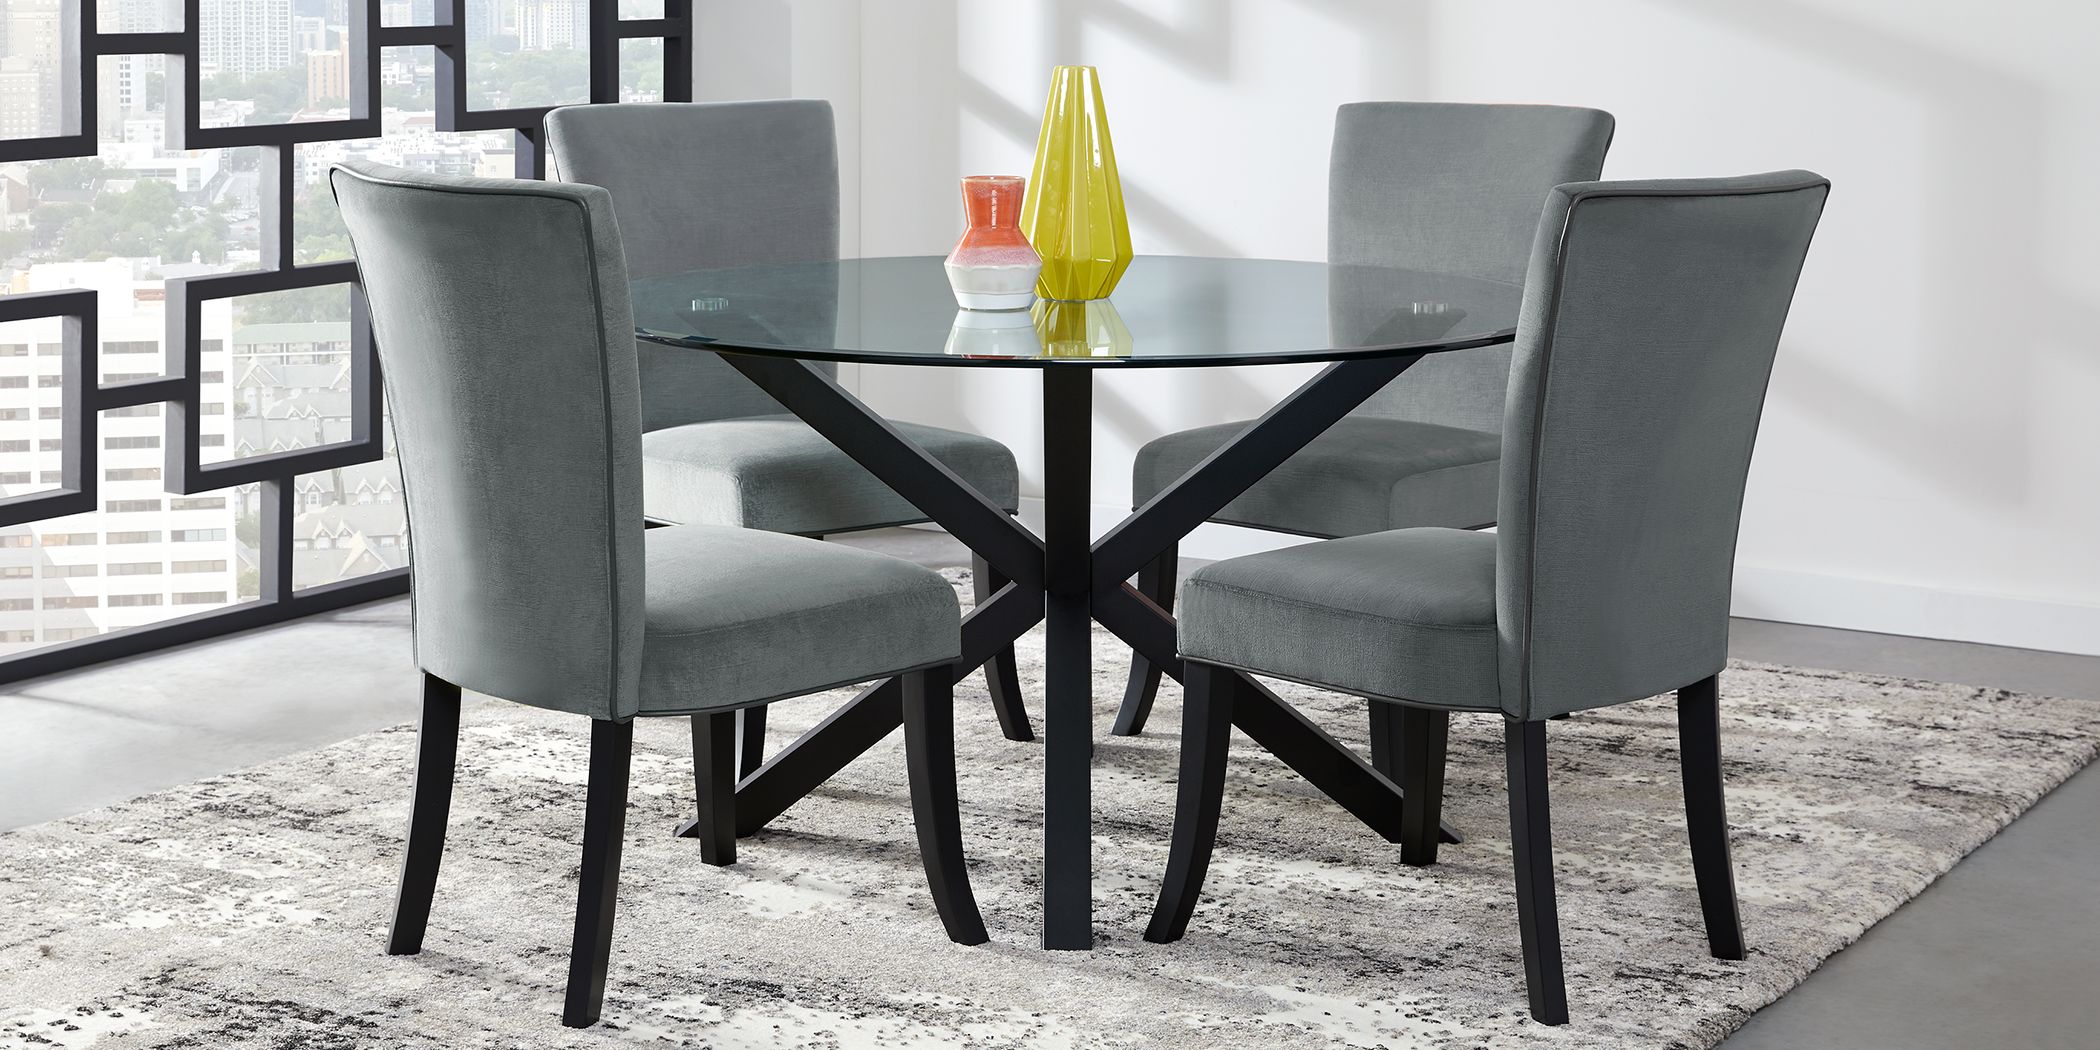 Https Wwwroomstogocom Furniture Product Palmetto Way 5 Pc Dining Set With Gray Chairs 4221702P